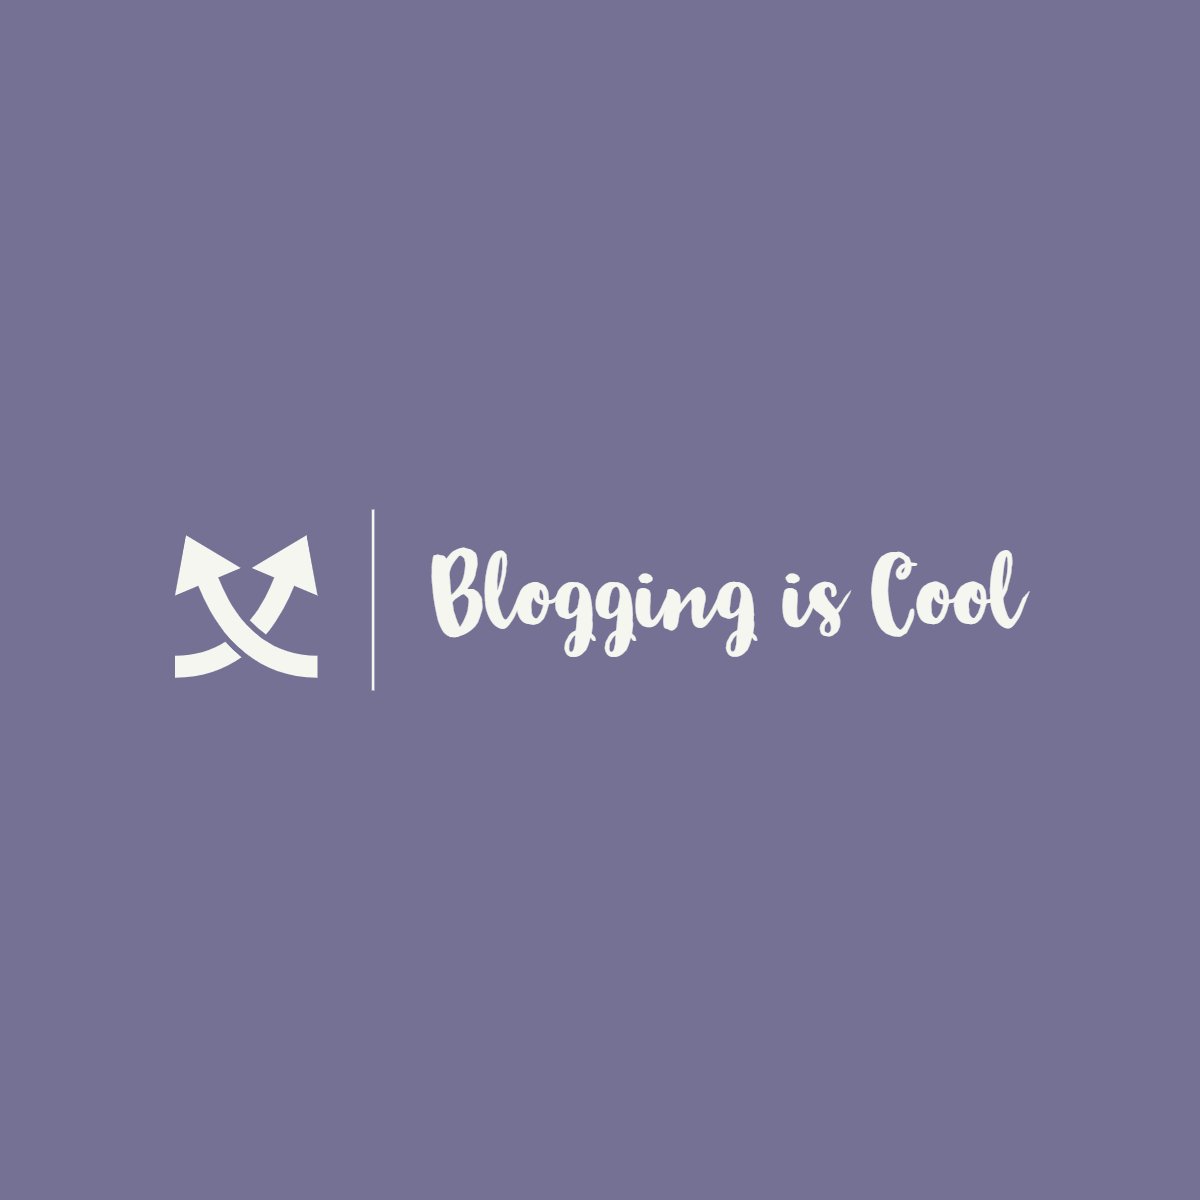 bloggingiscool.com is about blogging and making your blog better